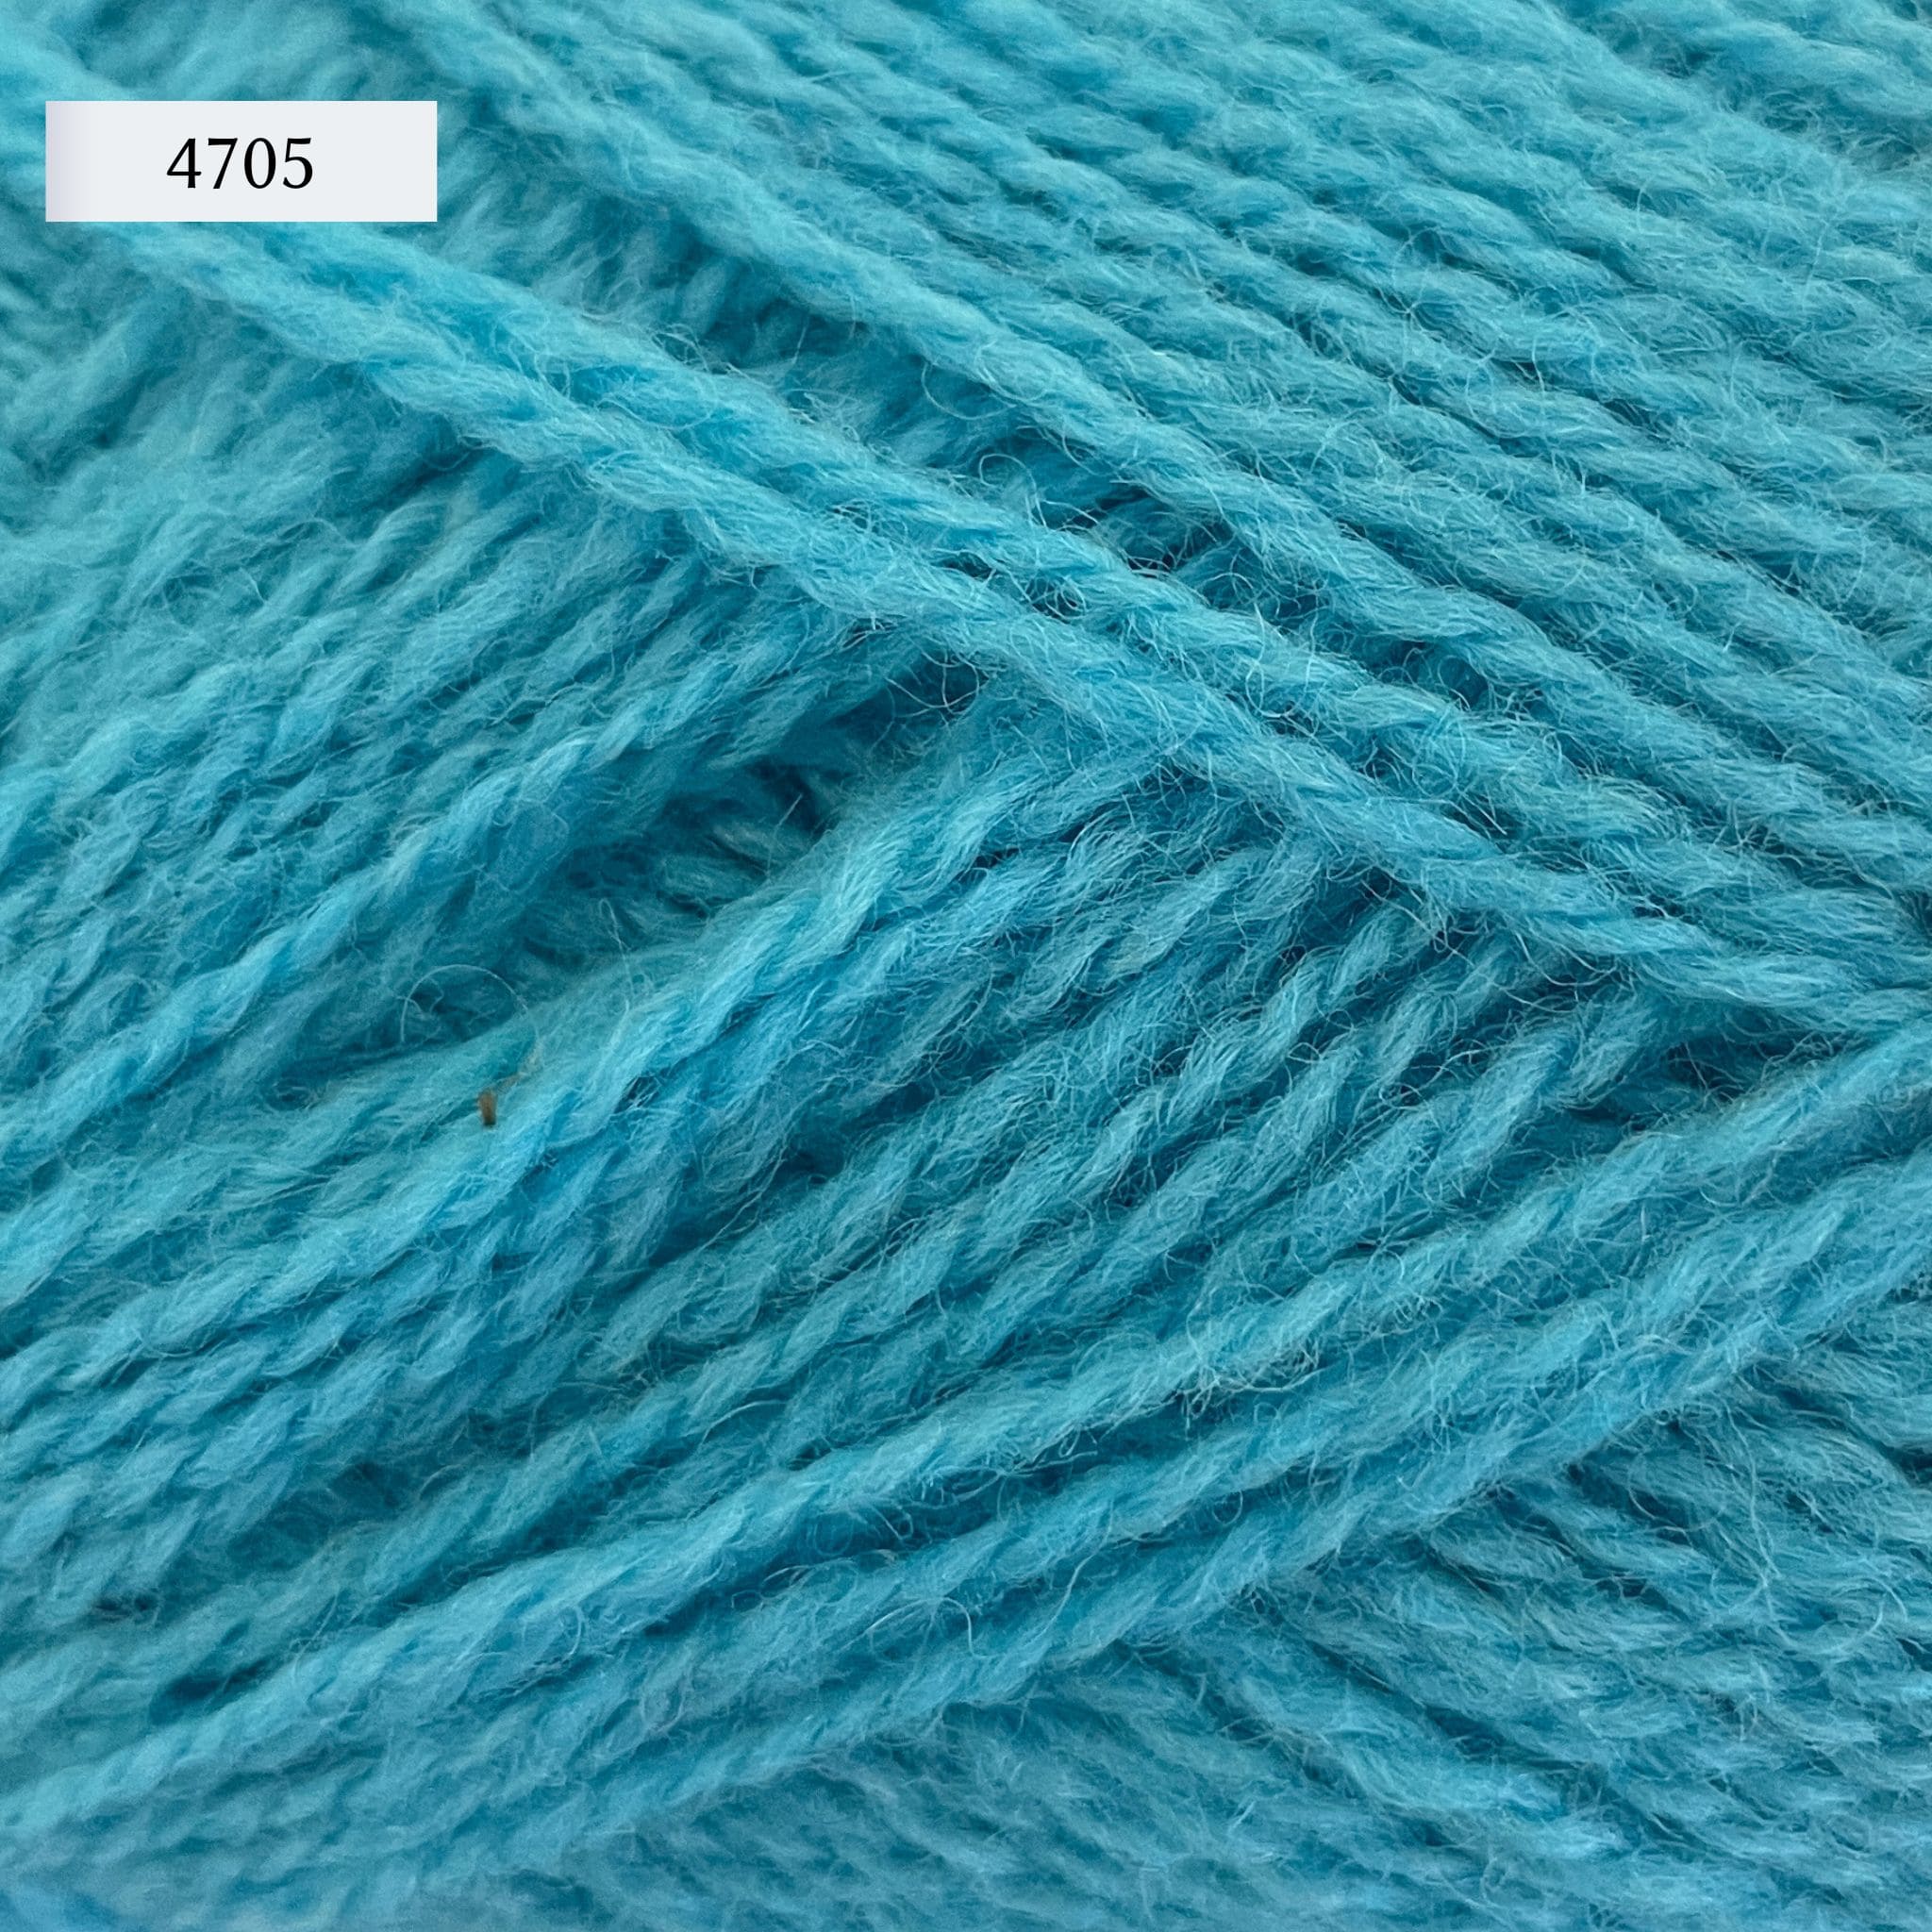 Rauma Finullgarn, a fingering/sport weight yarn, in color 472, a light turquoise blue